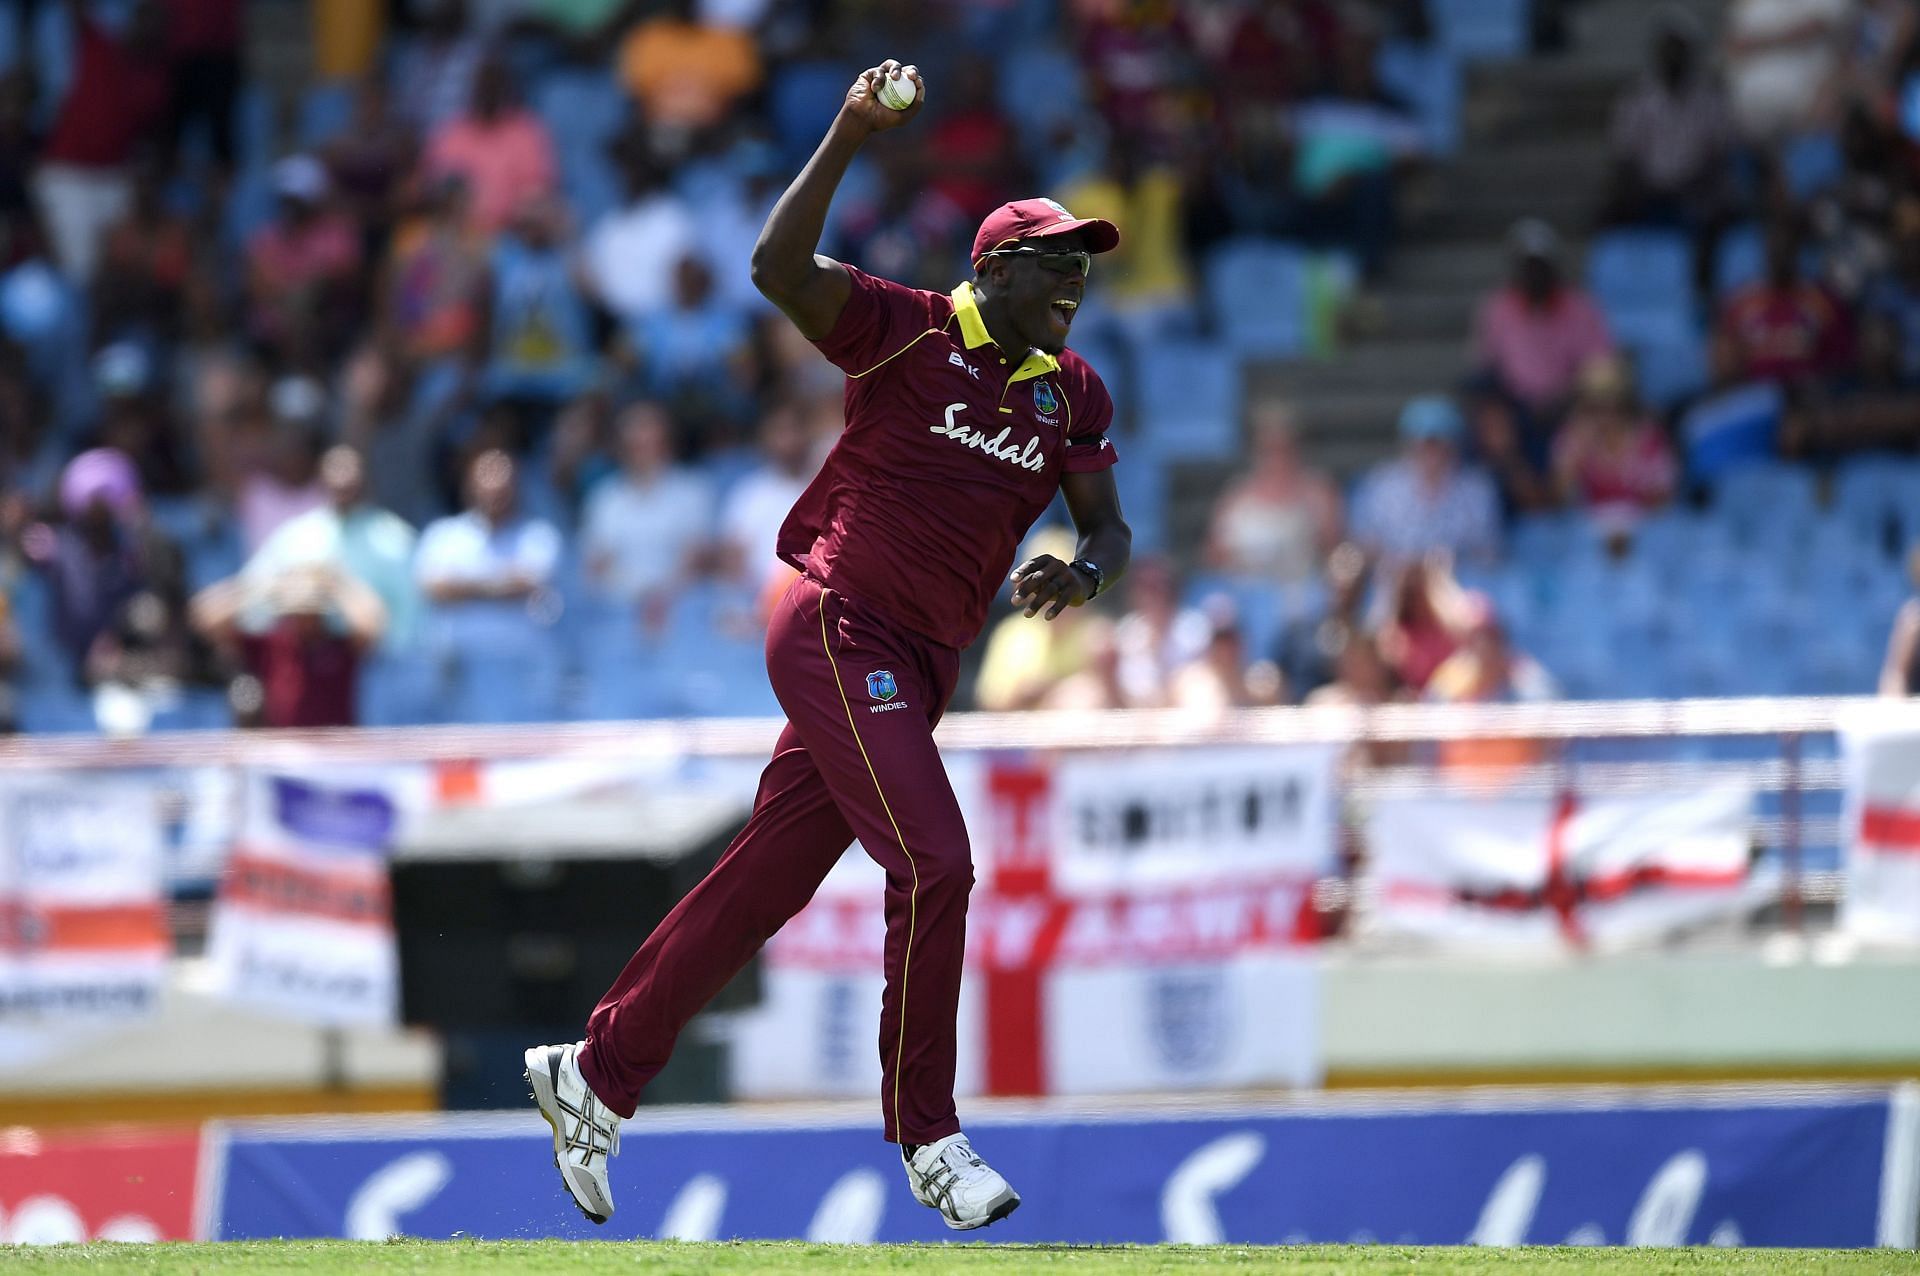 Carlos Brathwaite is expected to be a pivotal player for his side